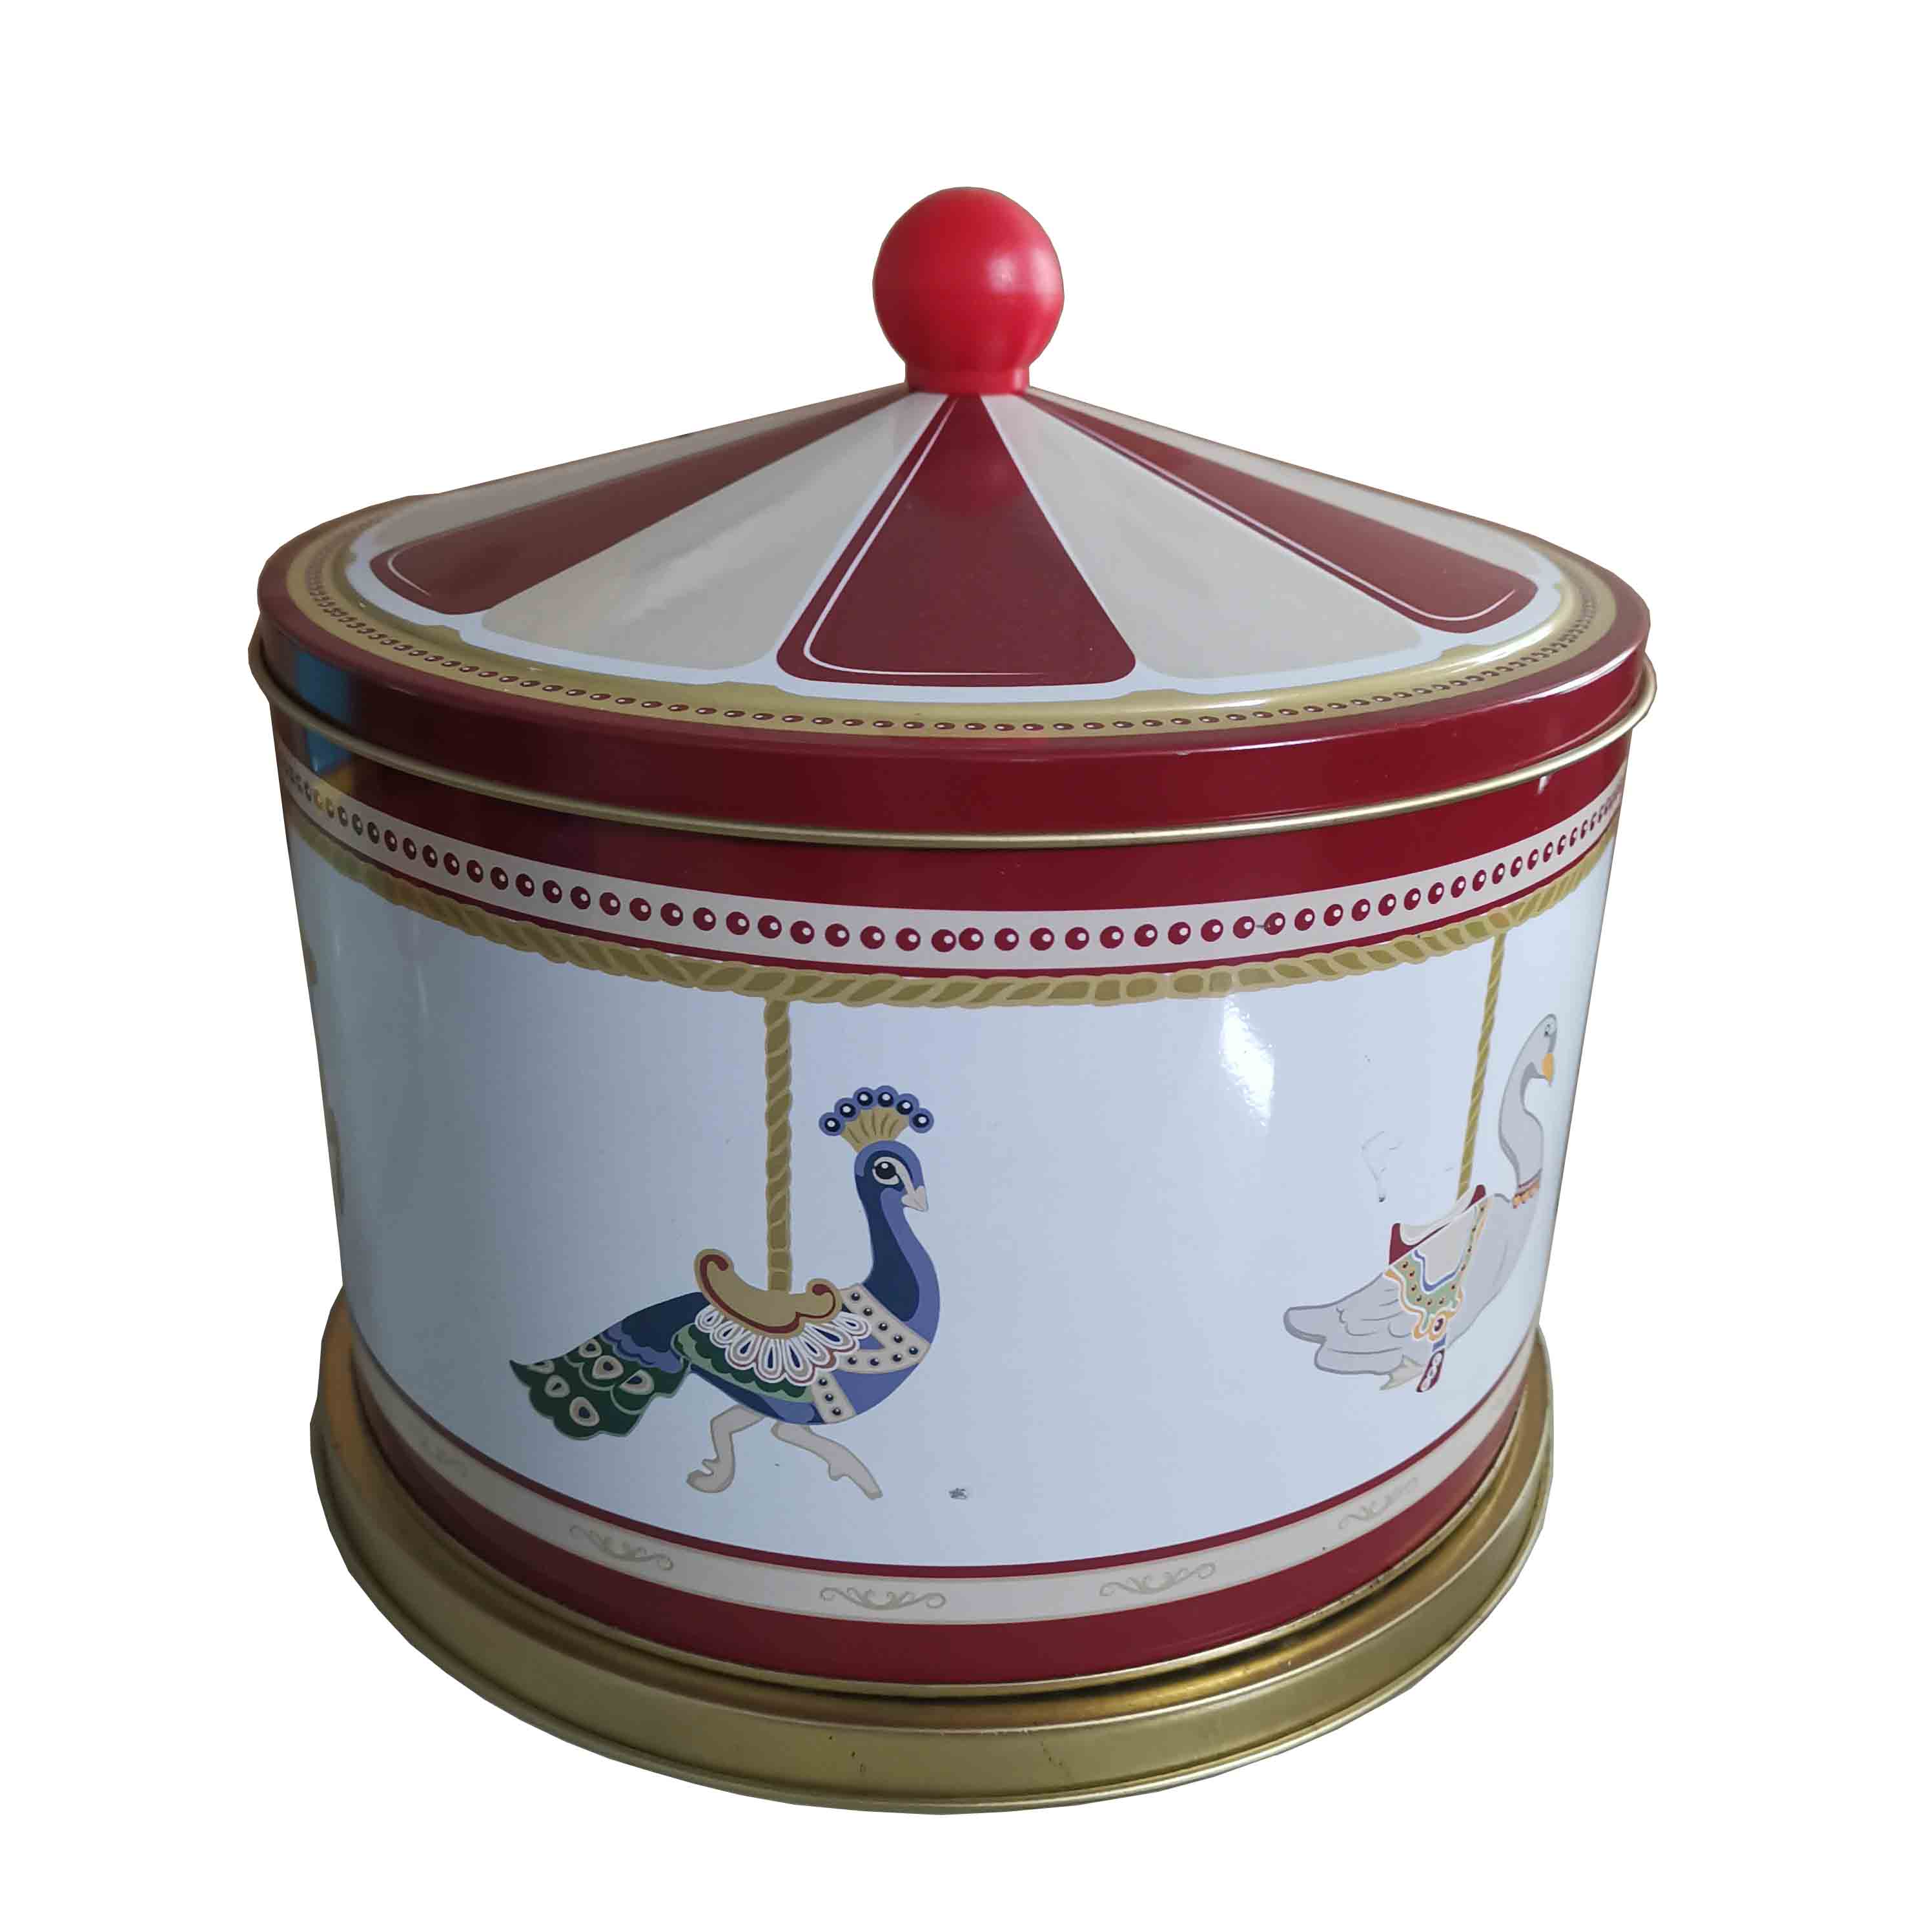 Biscuits Tins, Cookie Tins, Christmas music can, Lunch boxes,Biscuits Box, Cookie Box,